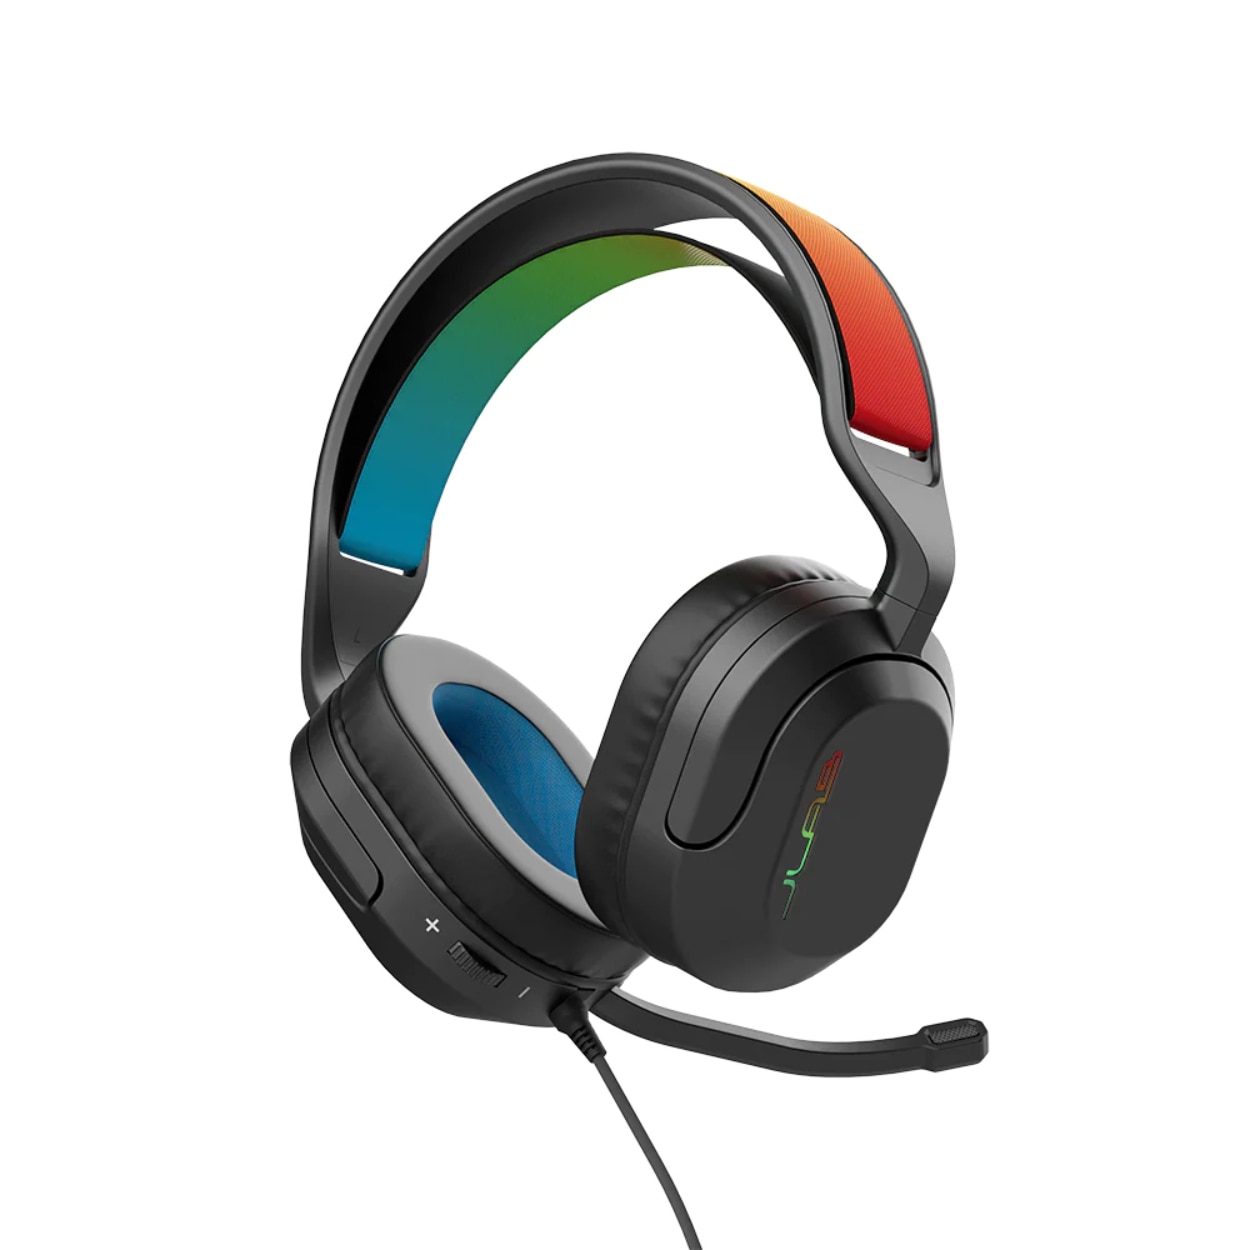 JLAB 3.5mm Wired Gaming Headset